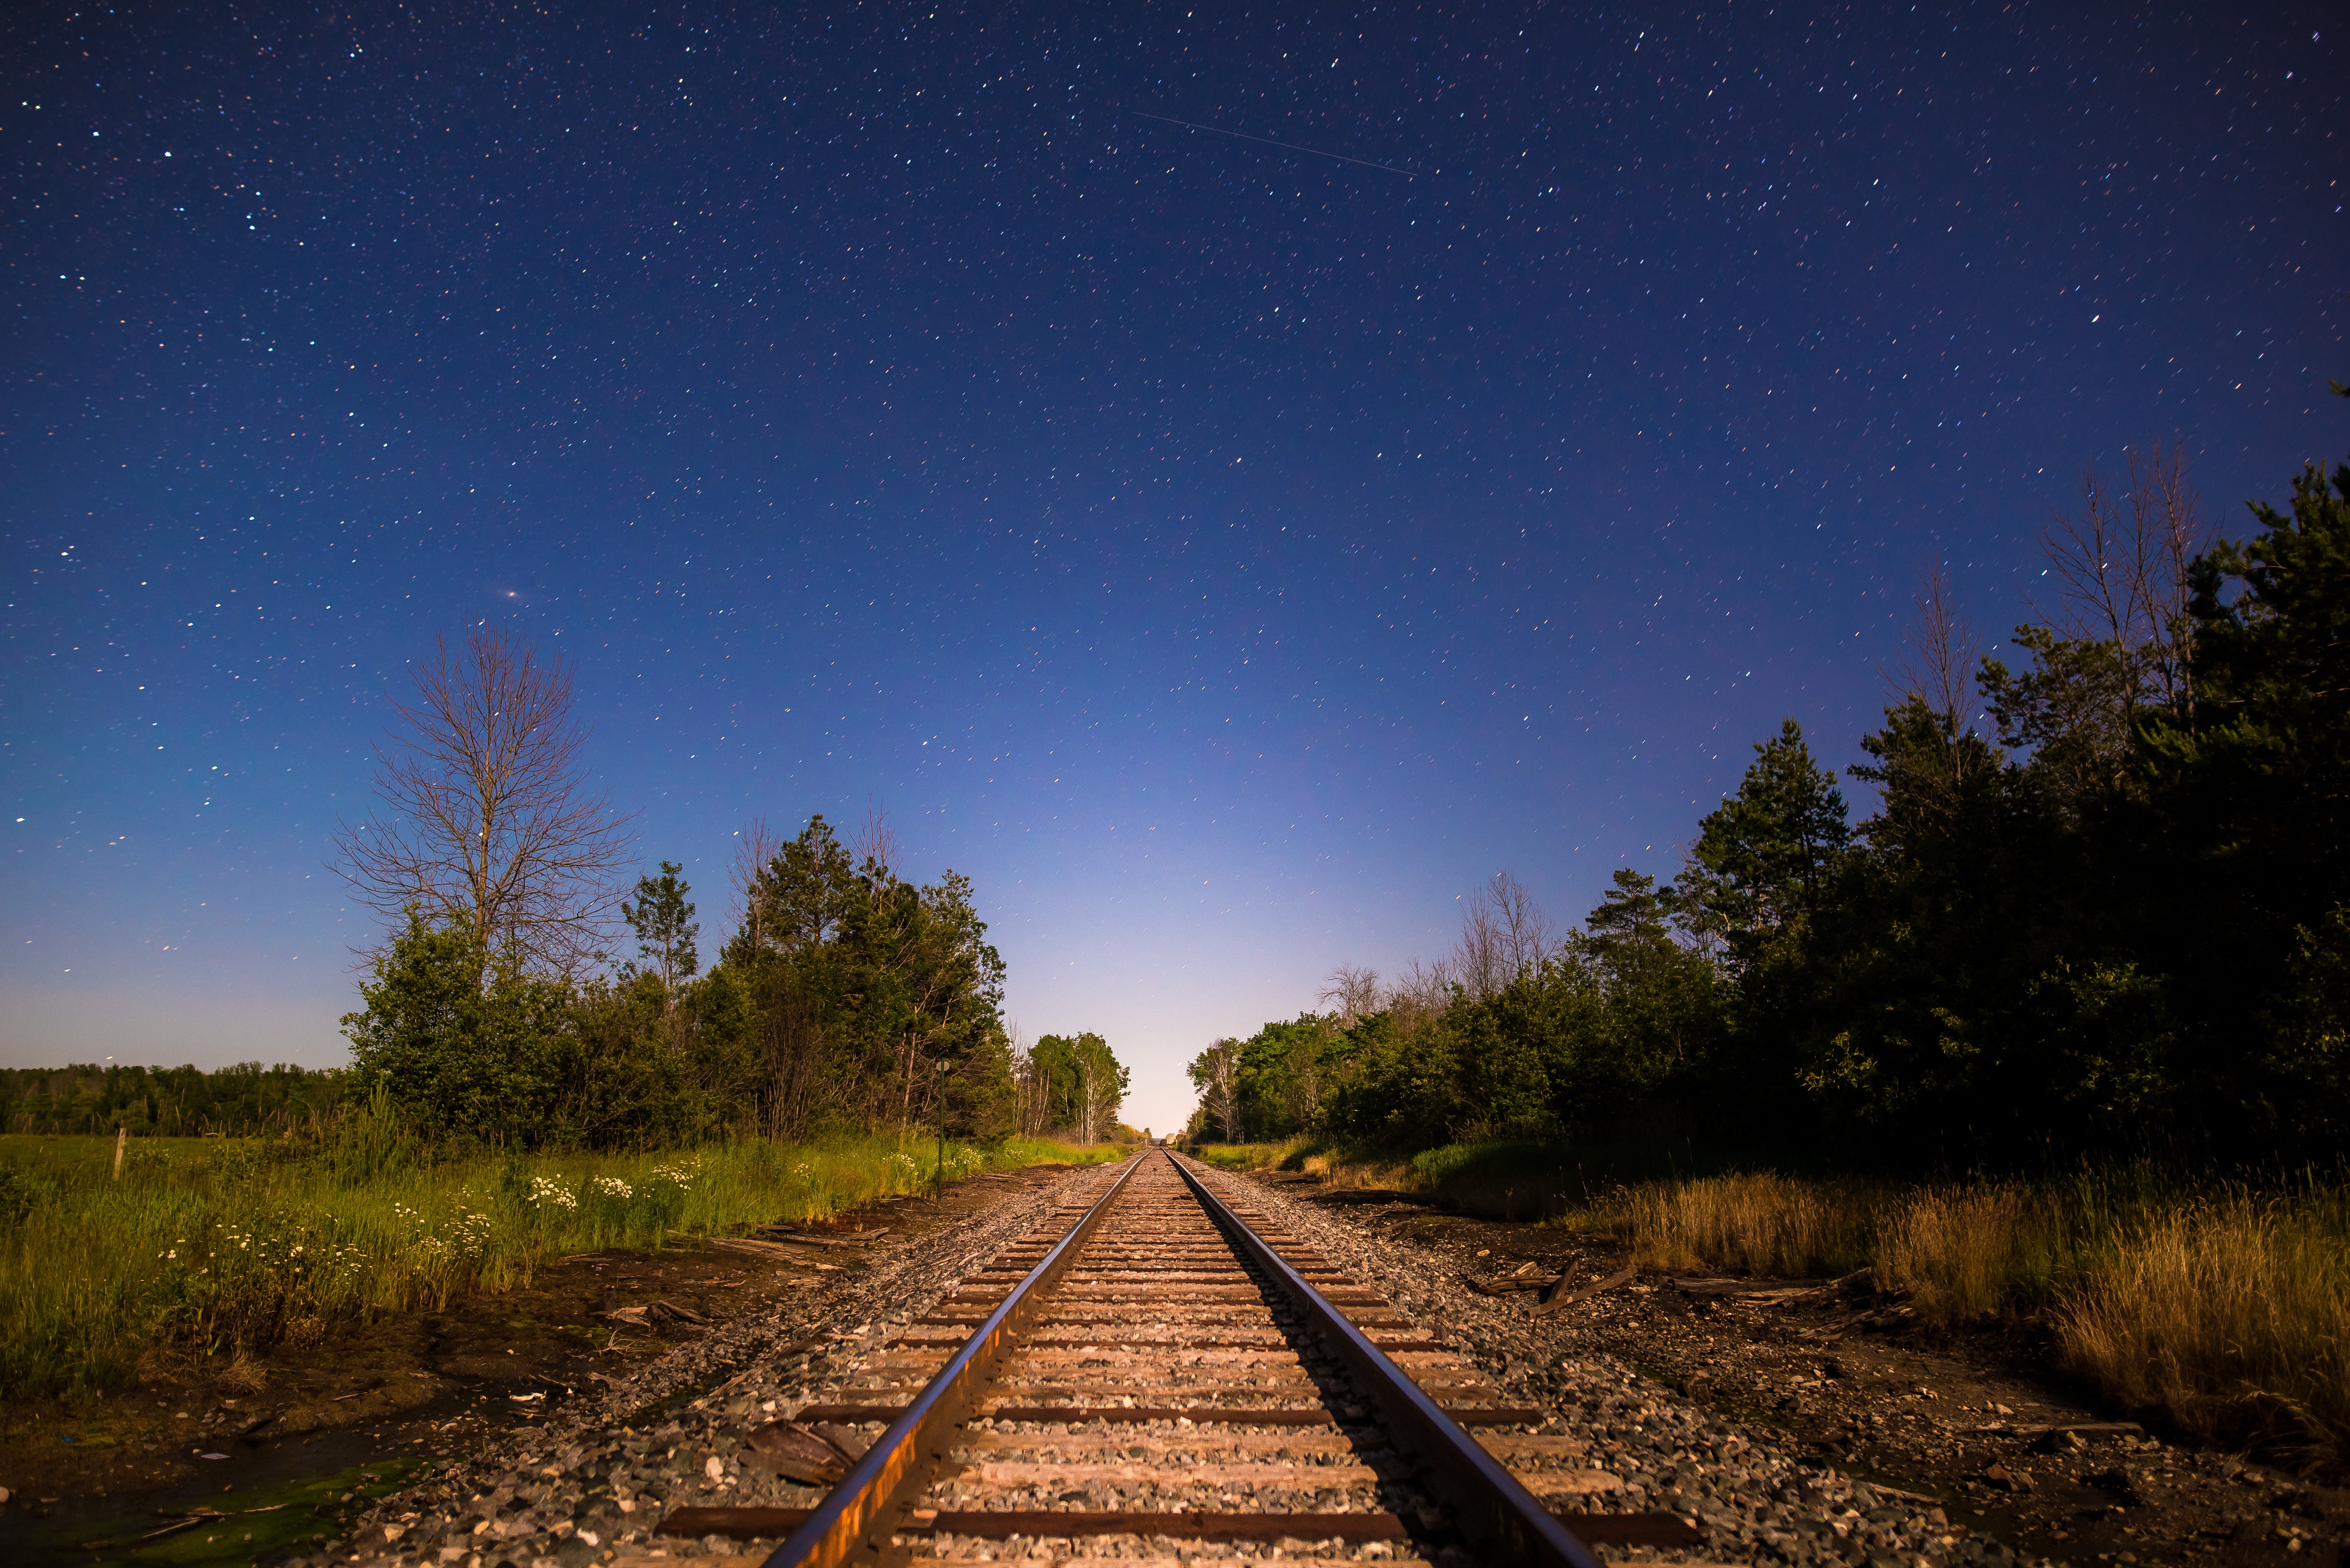 green trees, railway, starry sky, direction, track, railroad track